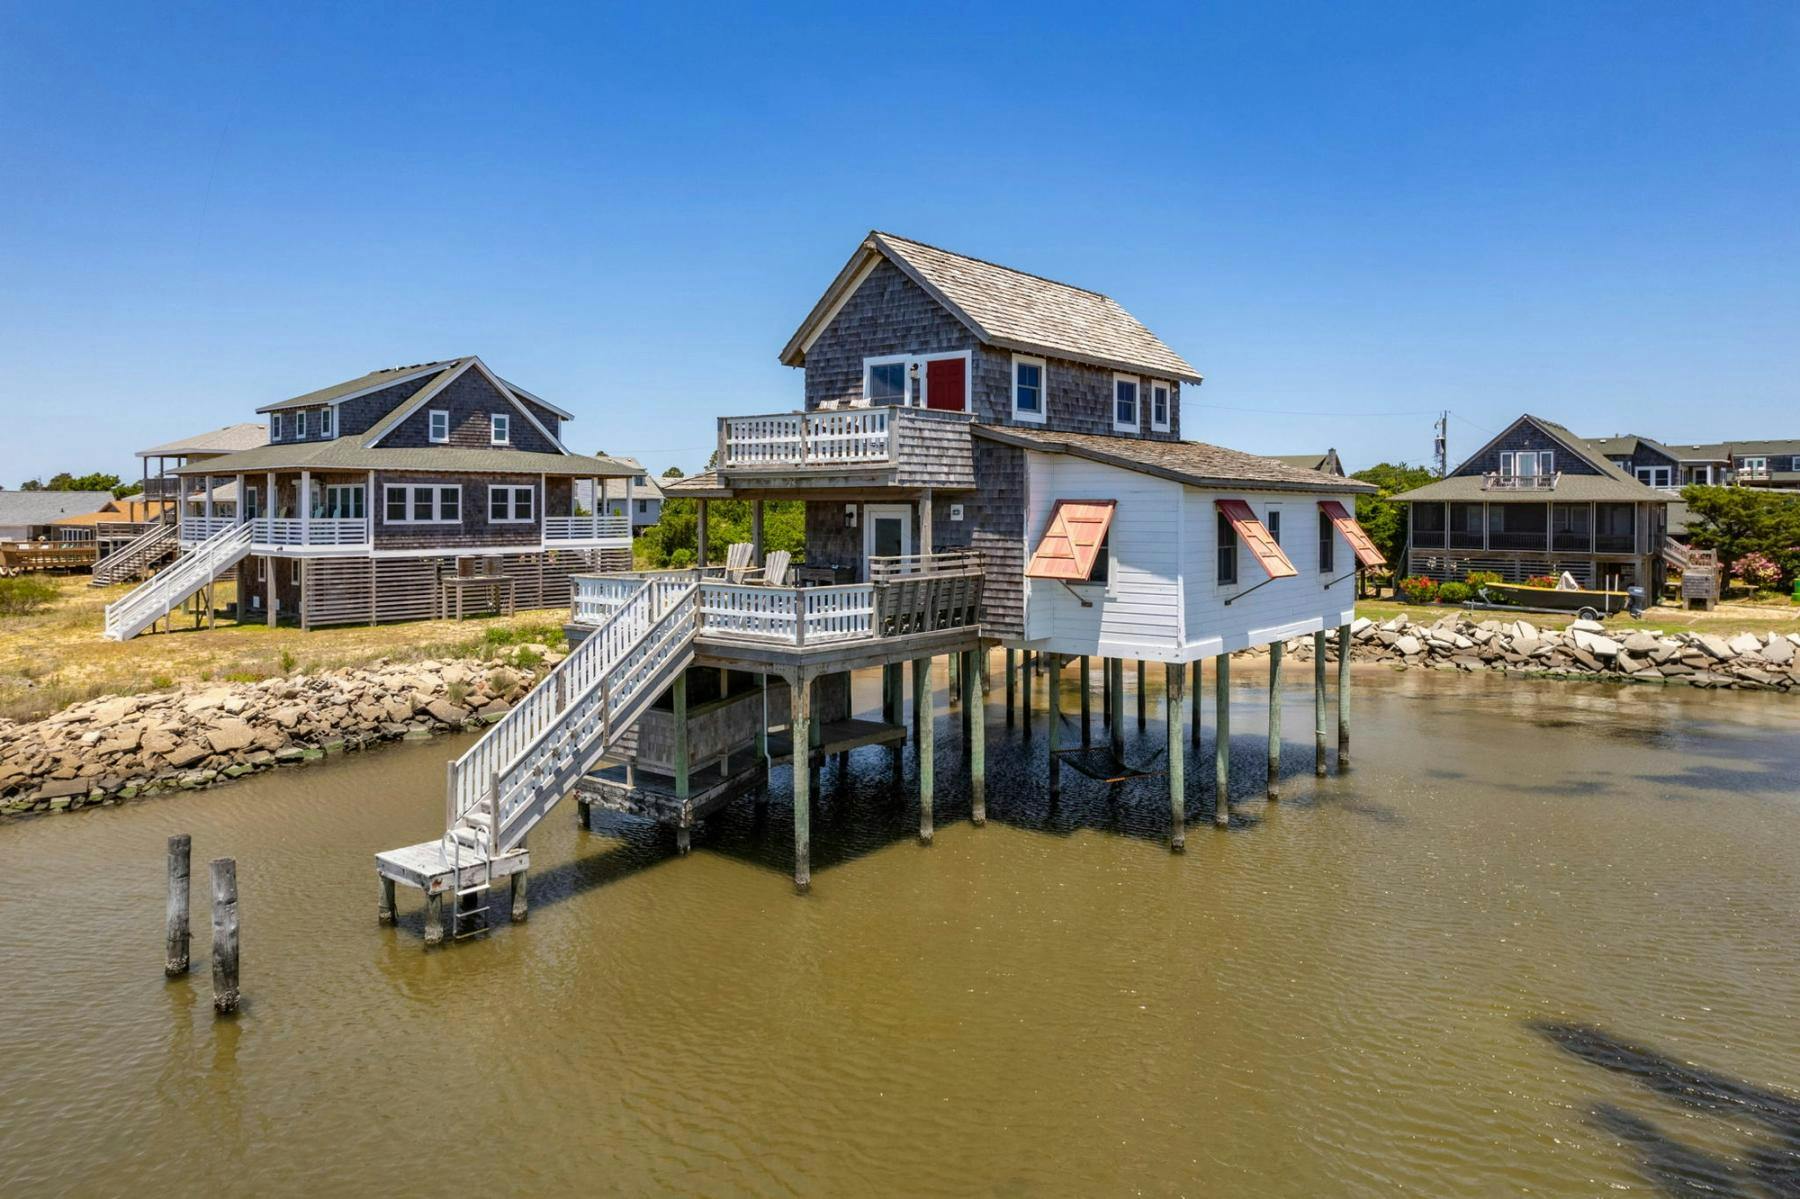 Classic style beach house in the Outer Banks by Coastal Carolina Vacations